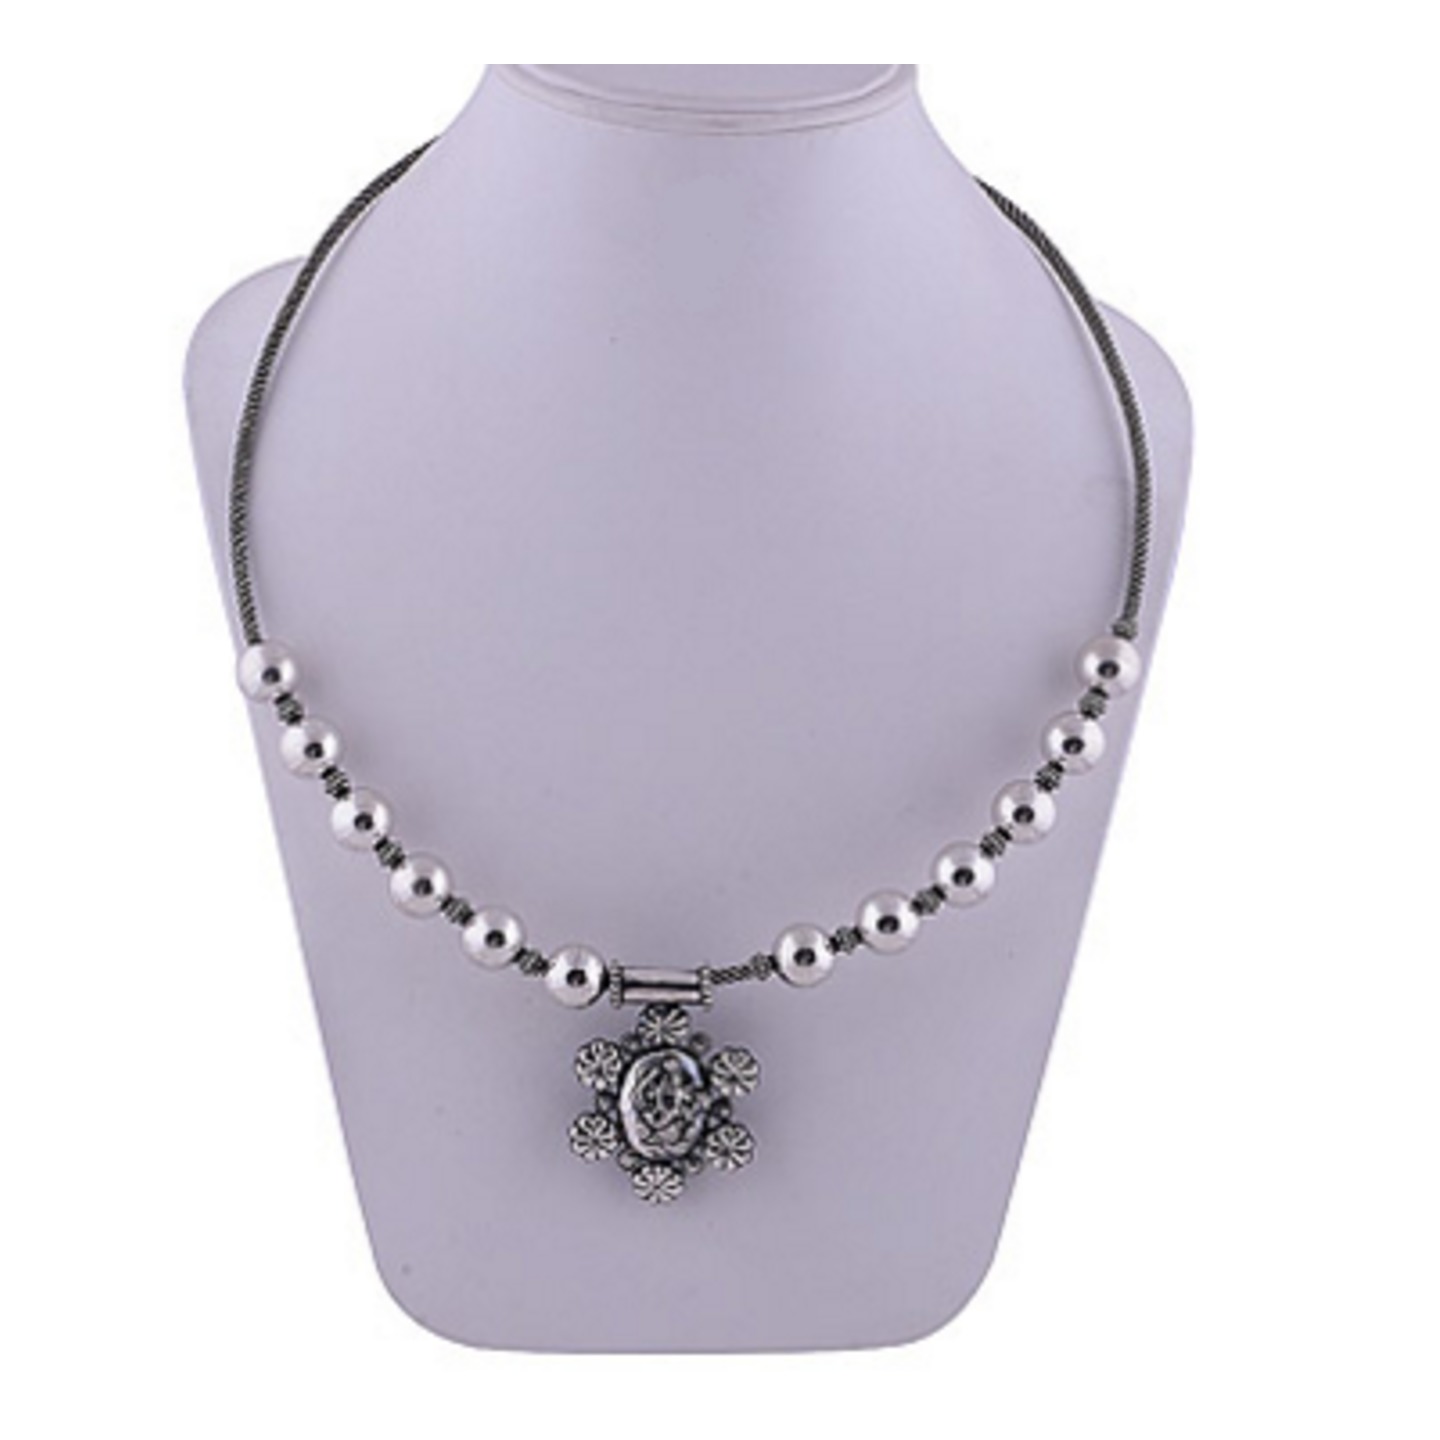 The Ekdant Silver Necklace